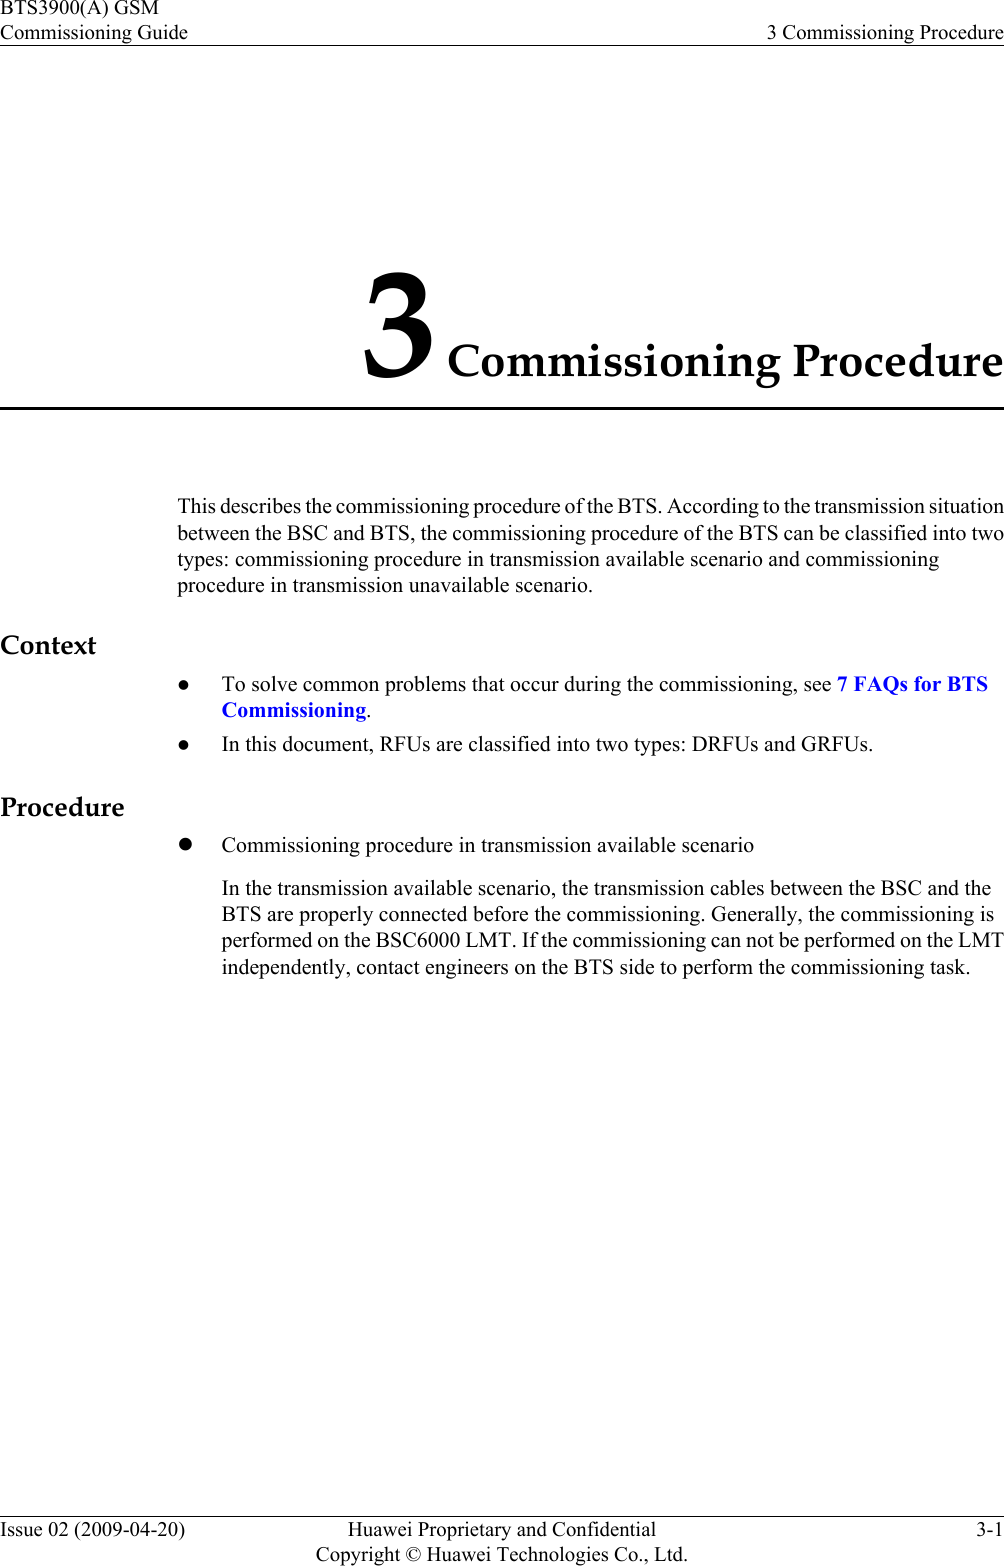 3 Commissioning ProcedureThis describes the commissioning procedure of the BTS. According to the transmission situationbetween the BSC and BTS, the commissioning procedure of the BTS can be classified into twotypes: commissioning procedure in transmission available scenario and commissioningprocedure in transmission unavailable scenario.ContextlTo solve common problems that occur during the commissioning, see 7 FAQs for BTSCommissioning.lIn this document, RFUs are classified into two types: DRFUs and GRFUs.ProcedurelCommissioning procedure in transmission available scenarioIn the transmission available scenario, the transmission cables between the BSC and theBTS are properly connected before the commissioning. Generally, the commissioning isperformed on the BSC6000 LMT. If the commissioning can not be performed on the LMTindependently, contact engineers on the BTS side to perform the commissioning task.BTS3900(A) GSMCommissioning Guide 3 Commissioning ProcedureIssue 02 (2009-04-20) Huawei Proprietary and ConfidentialCopyright © Huawei Technologies Co., Ltd.3-1